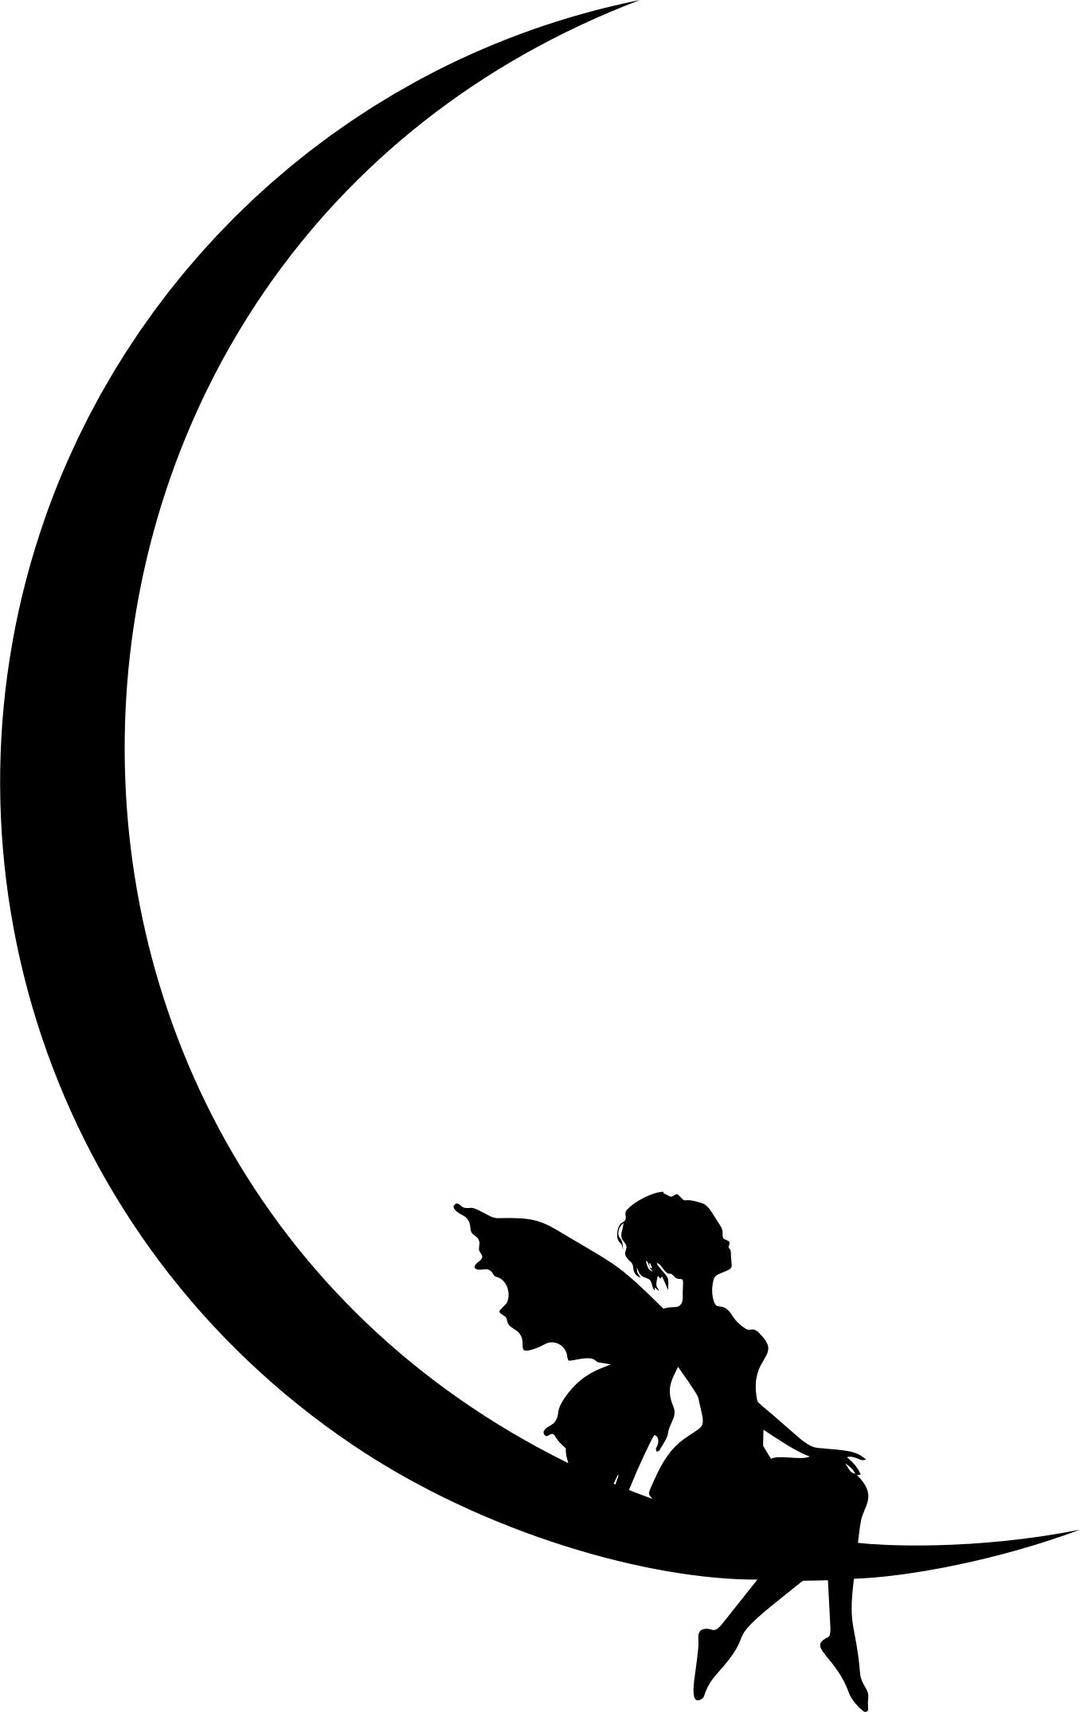 Fairy Resting On Crescent Moon By Yatheesh png transparent